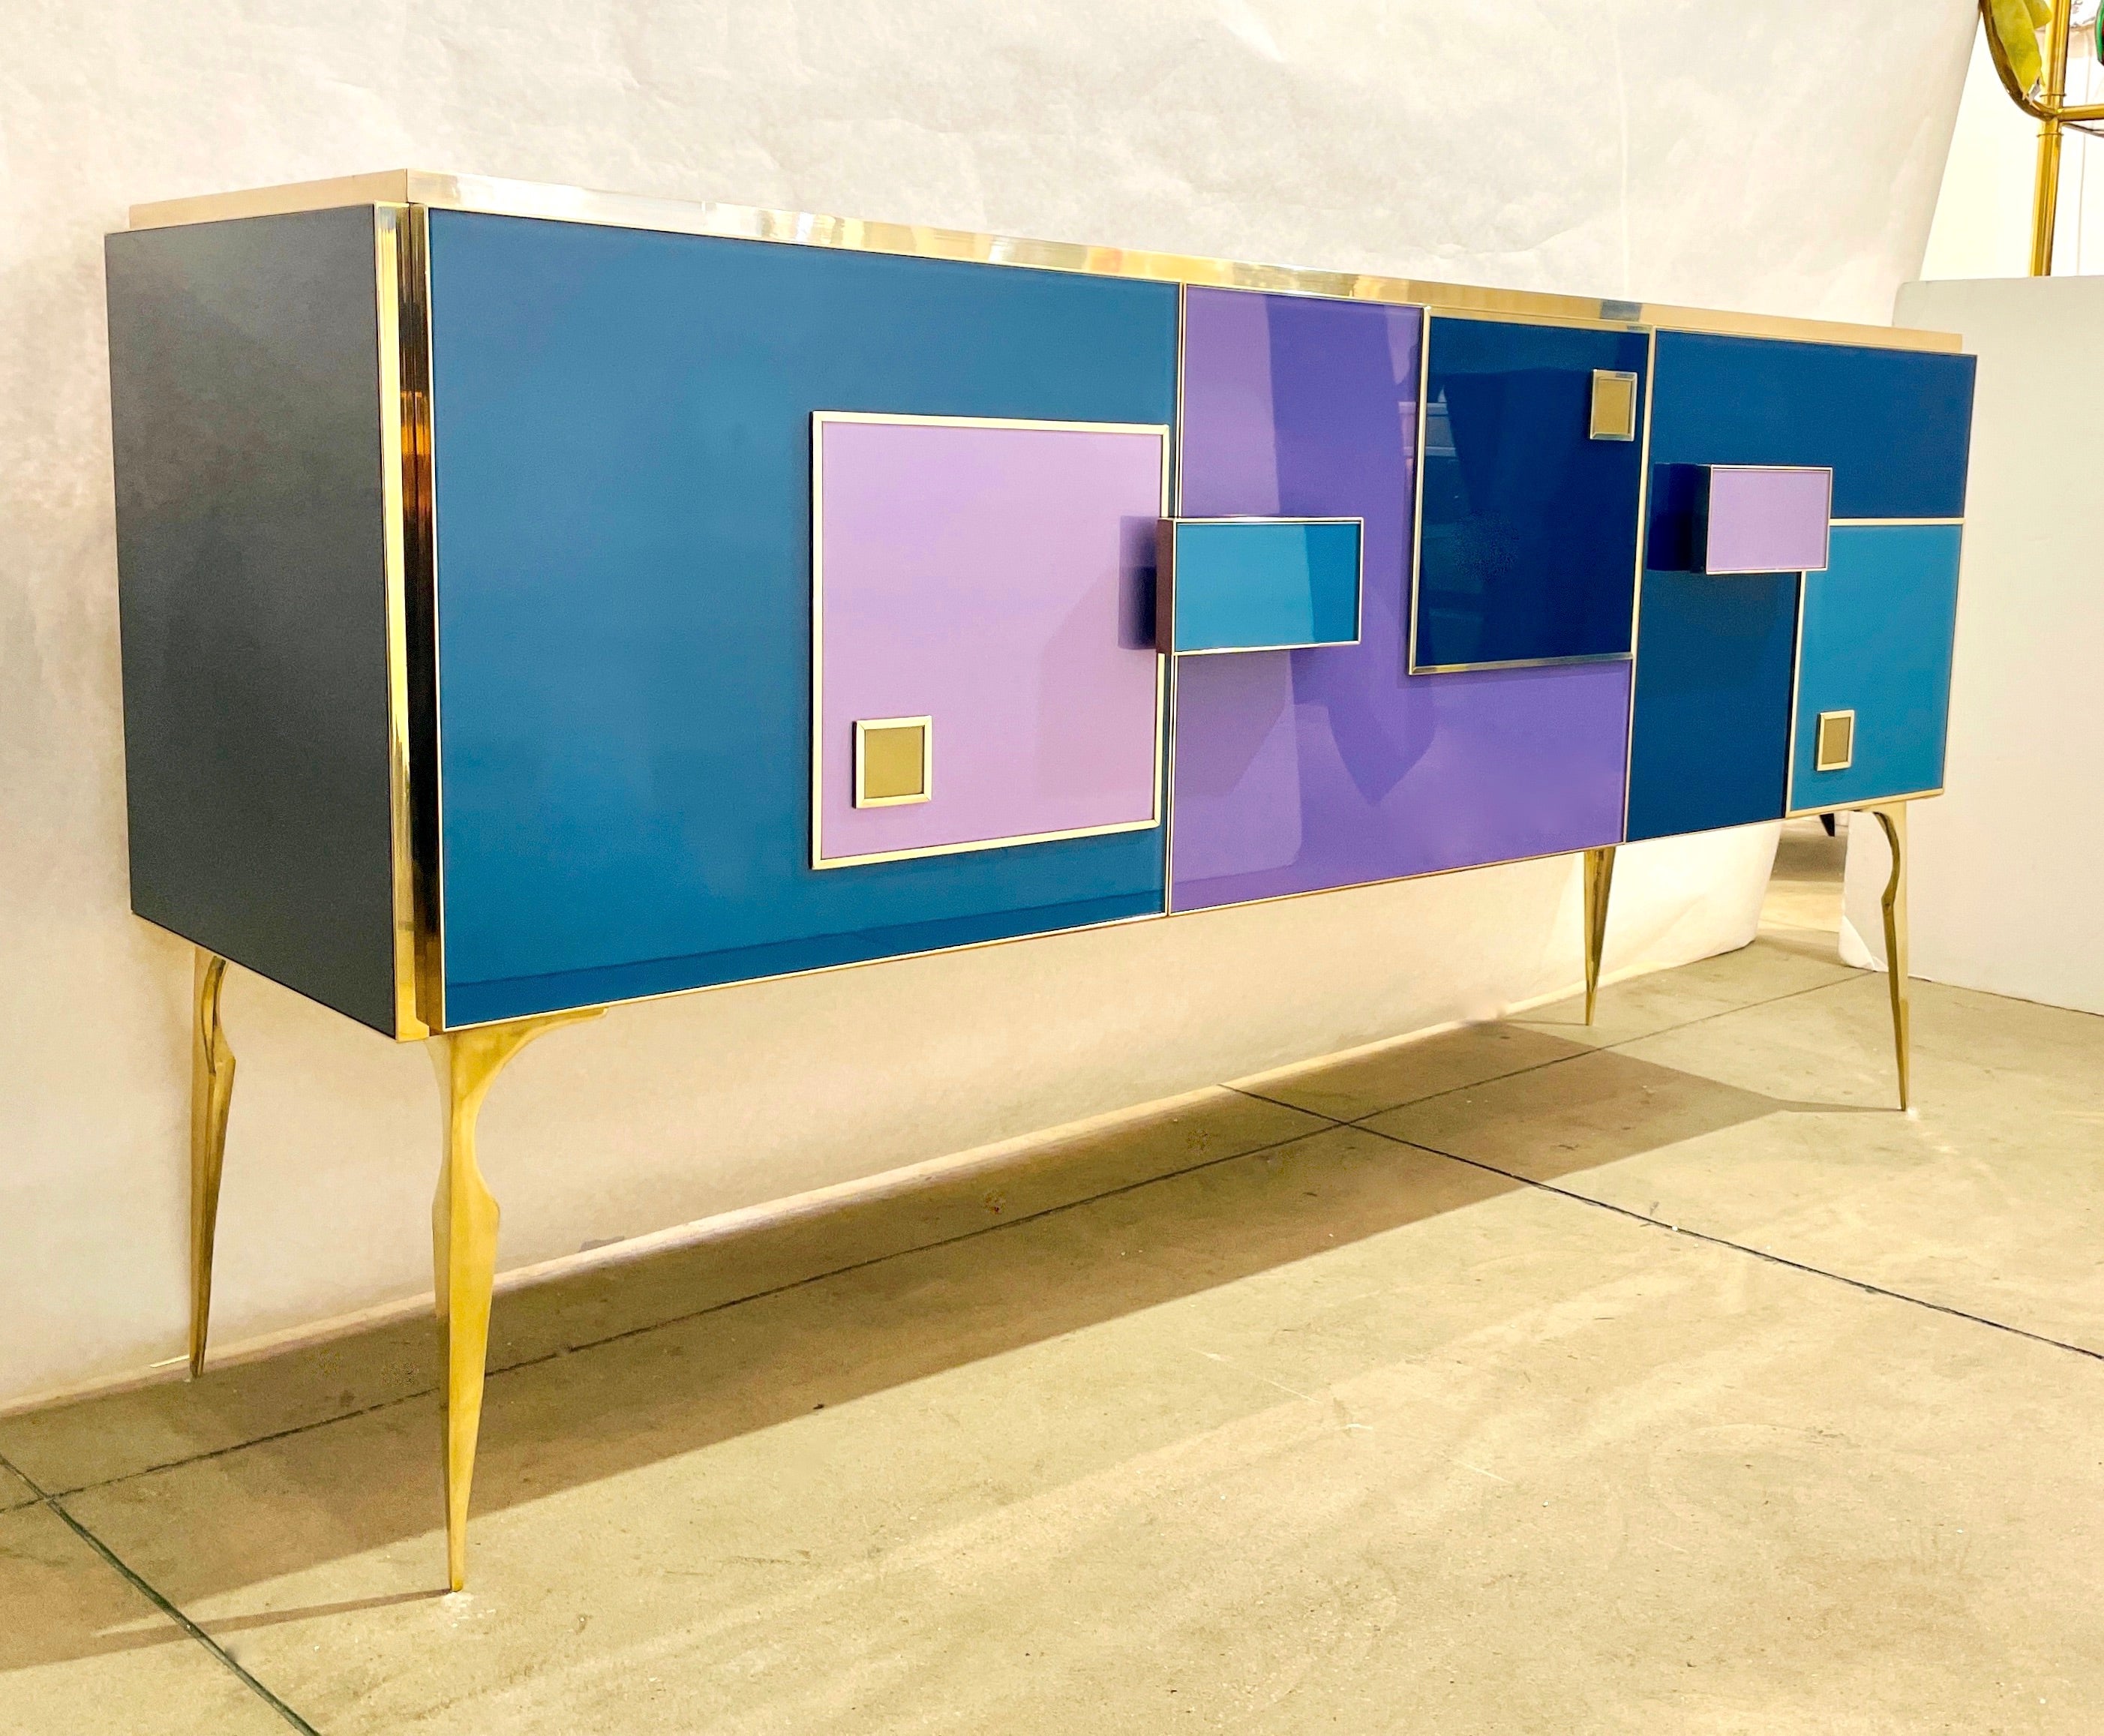 A creative 2 compartment, 3-door modern credenza, entirely handmade in Italy with high-quality details of execution in an attractive geometric decor with raised pattern and handles. An elegant, artistic and functional buffet or sideboard for